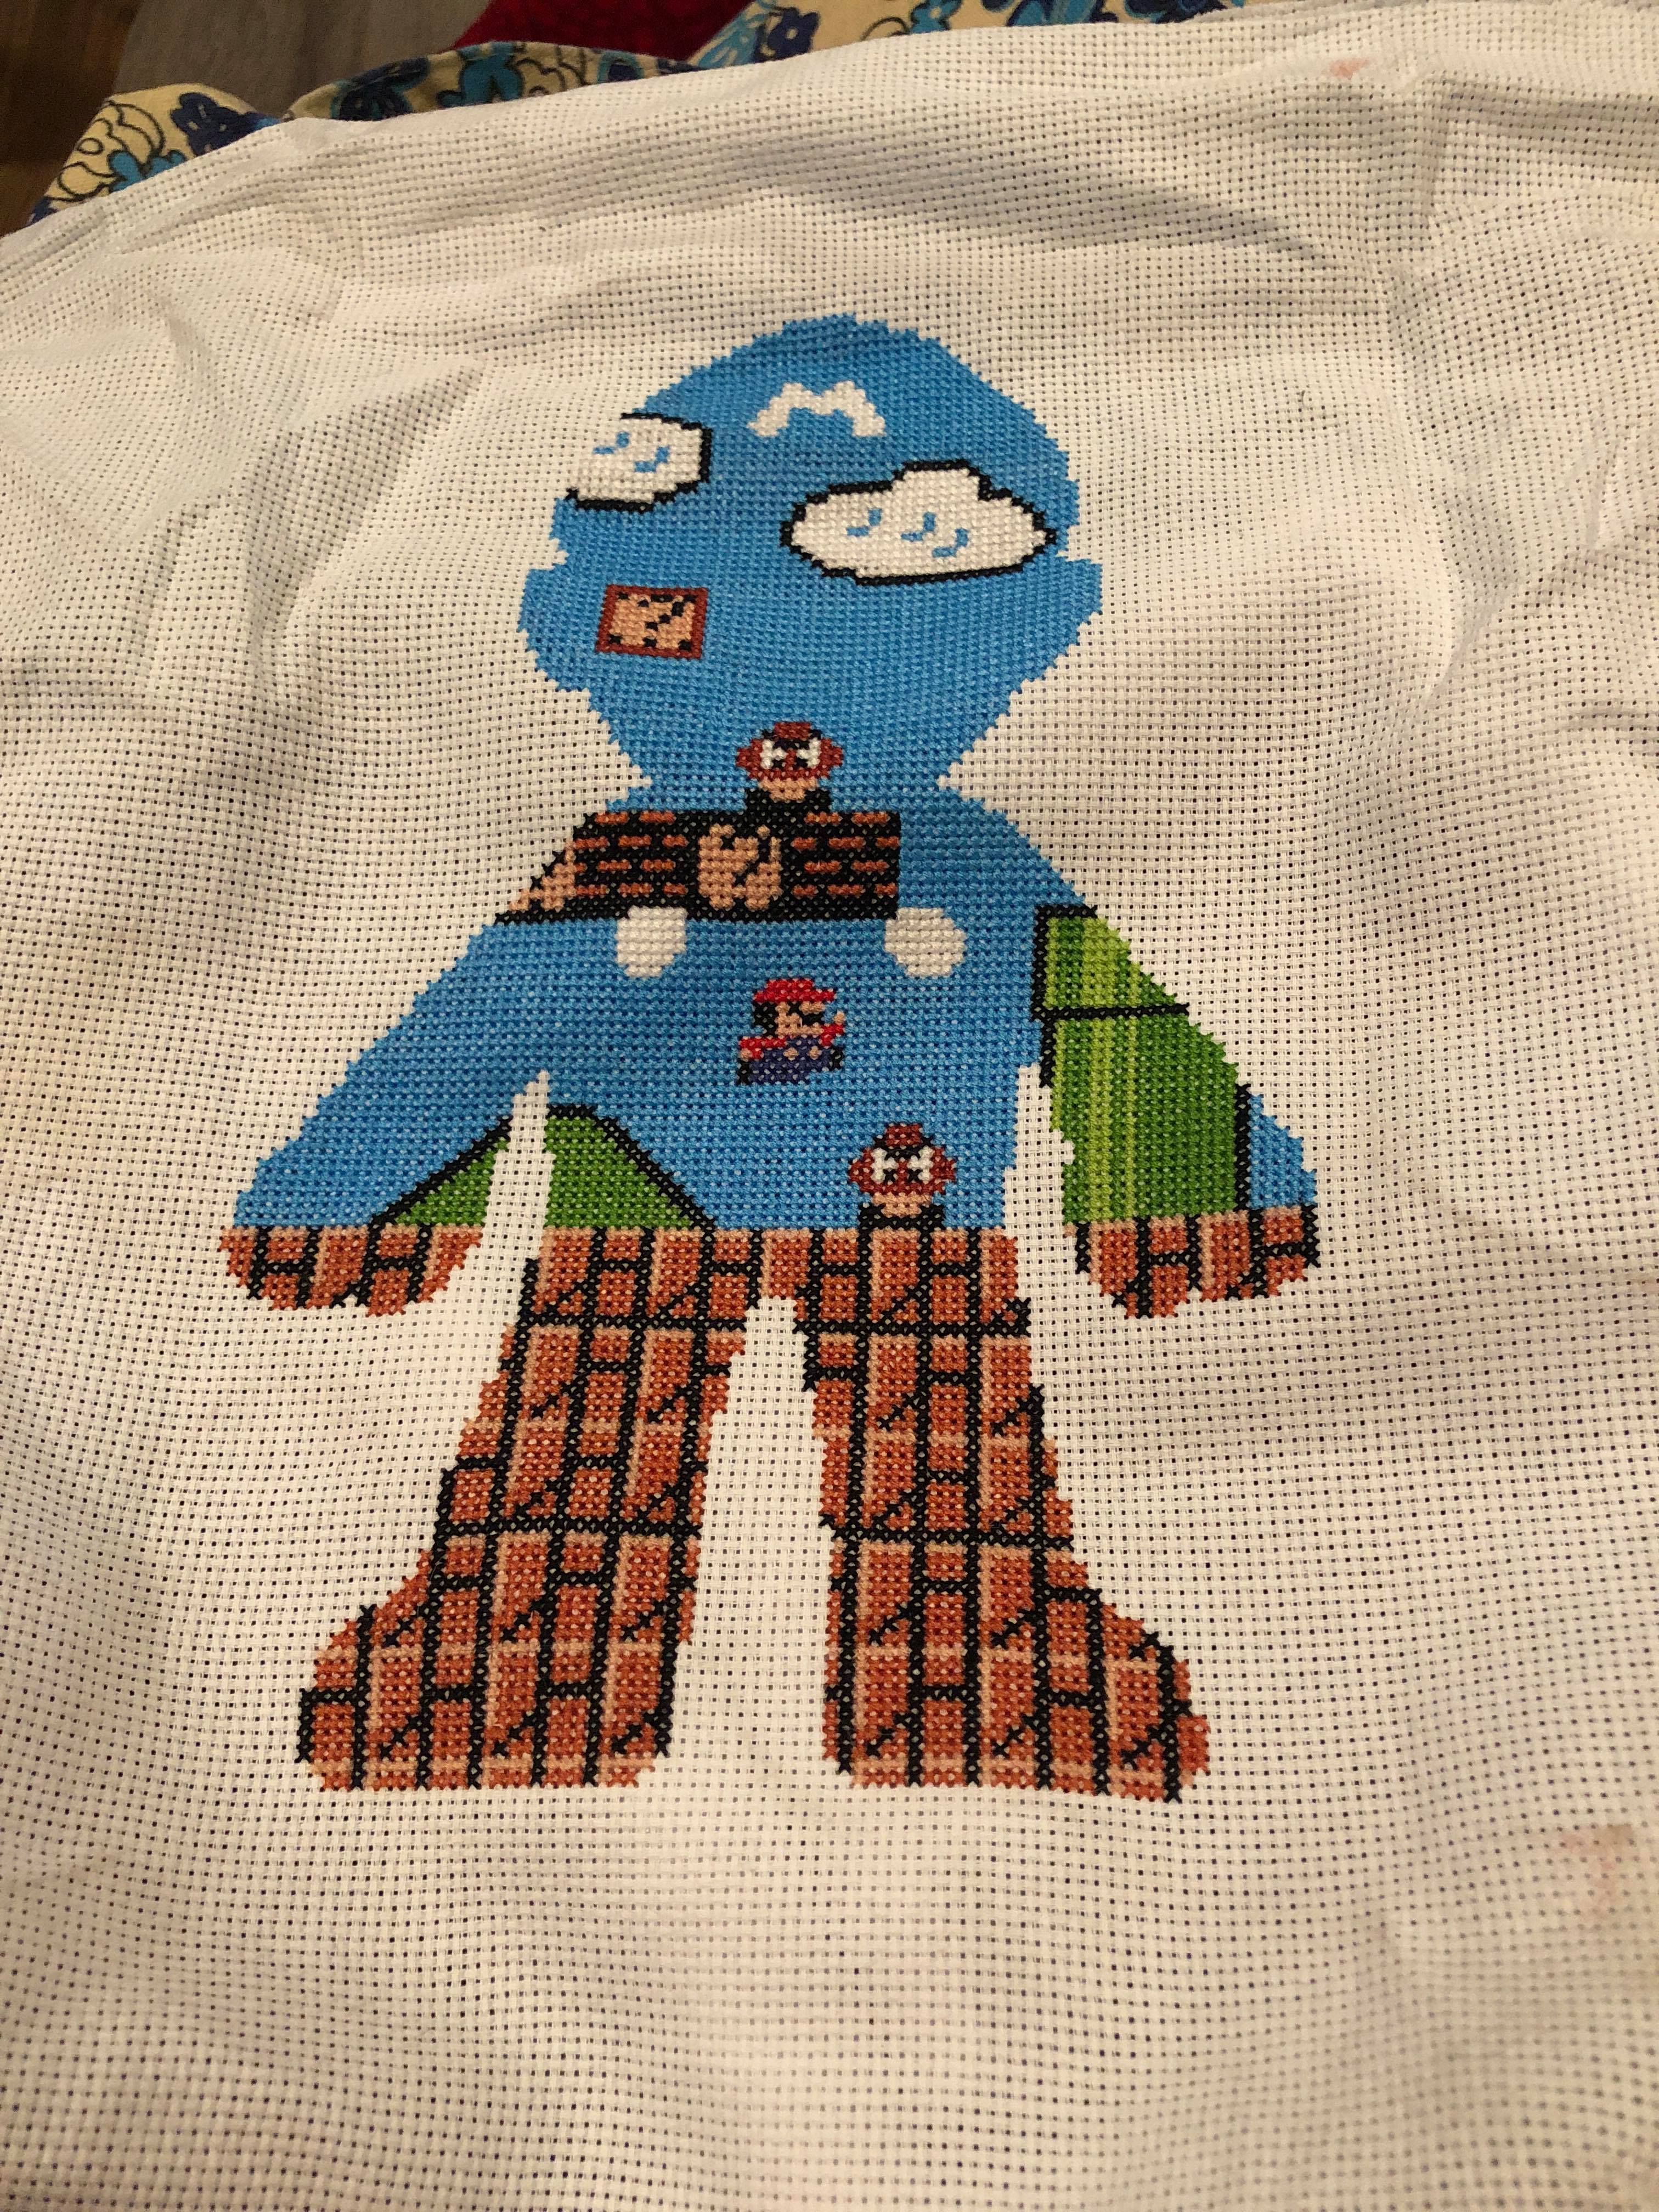 A cross stitch of the outline of Mario's body with a scene from original mario in it